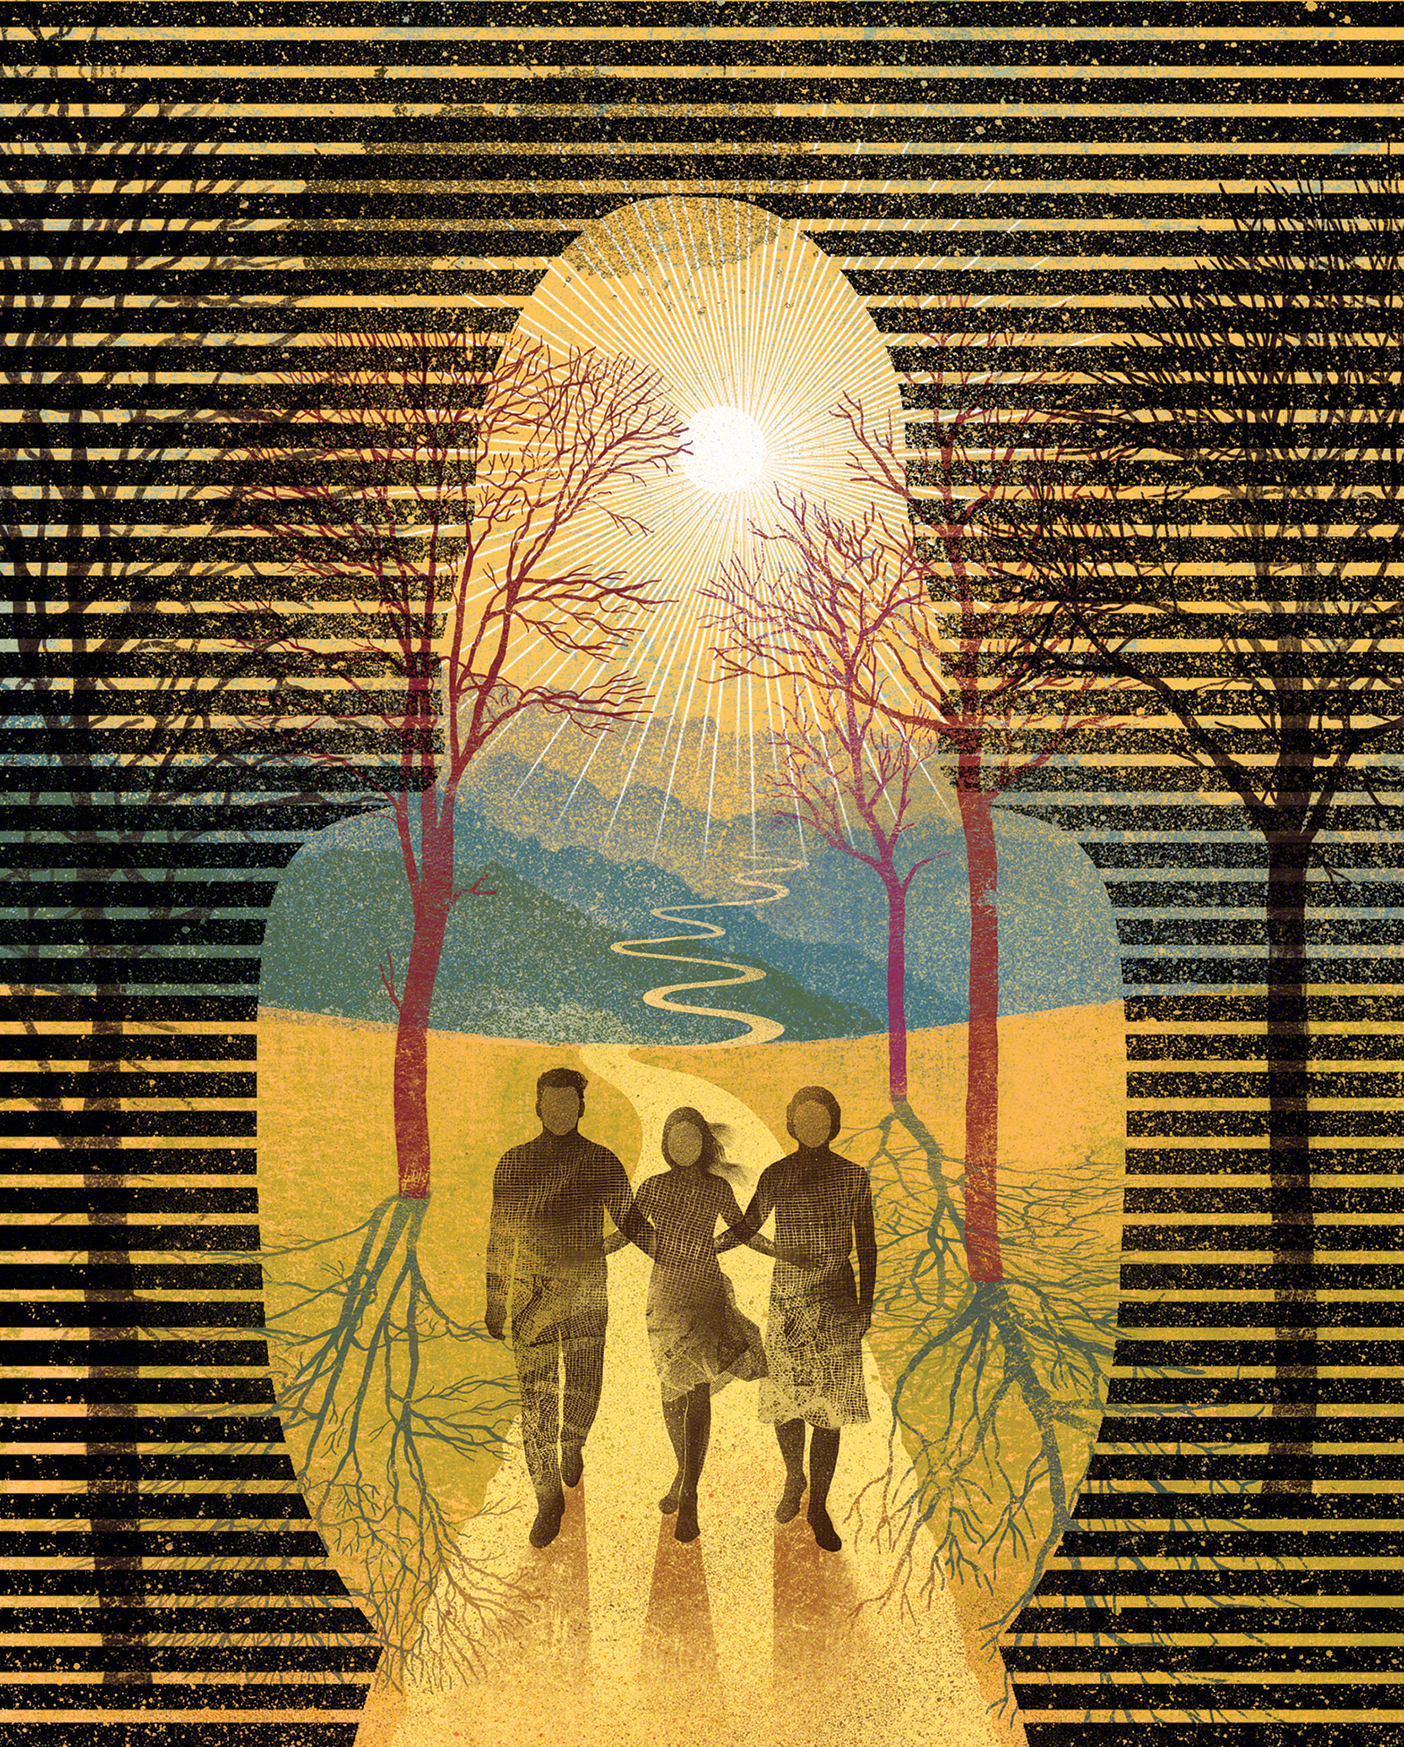 an illustration of a figure cut out of darkness. Inside the figure are three people walking with linked arms